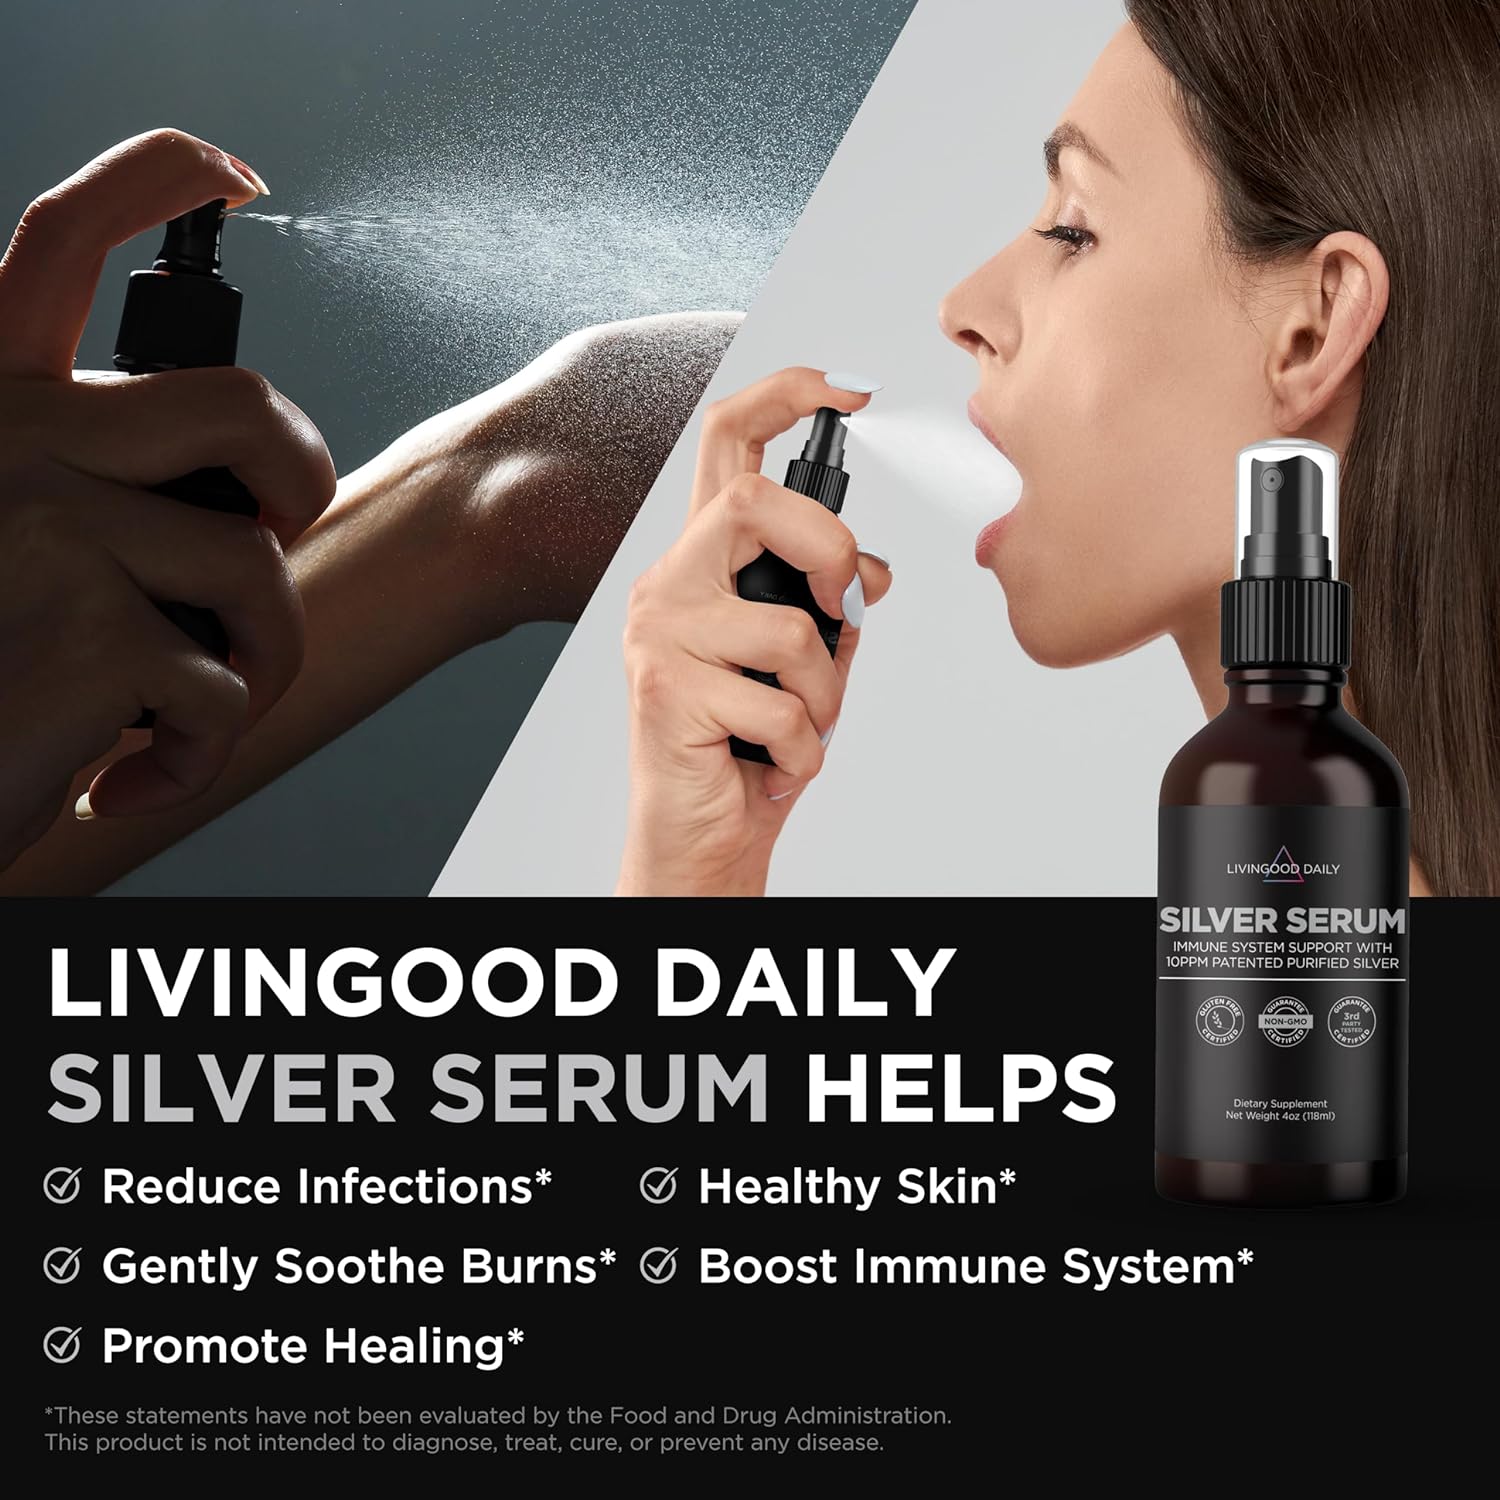 Livingood Daily Colloidal Silver Liquid Spray, Silver Serum (4 Fl Oz) - 10 PPM Colloidal Silver Spray for Eyes, Mouth, Ears, Nose & Skin - Immune Support Supplement for Urinary Health - Non-GMO, Vegan : Health & Household